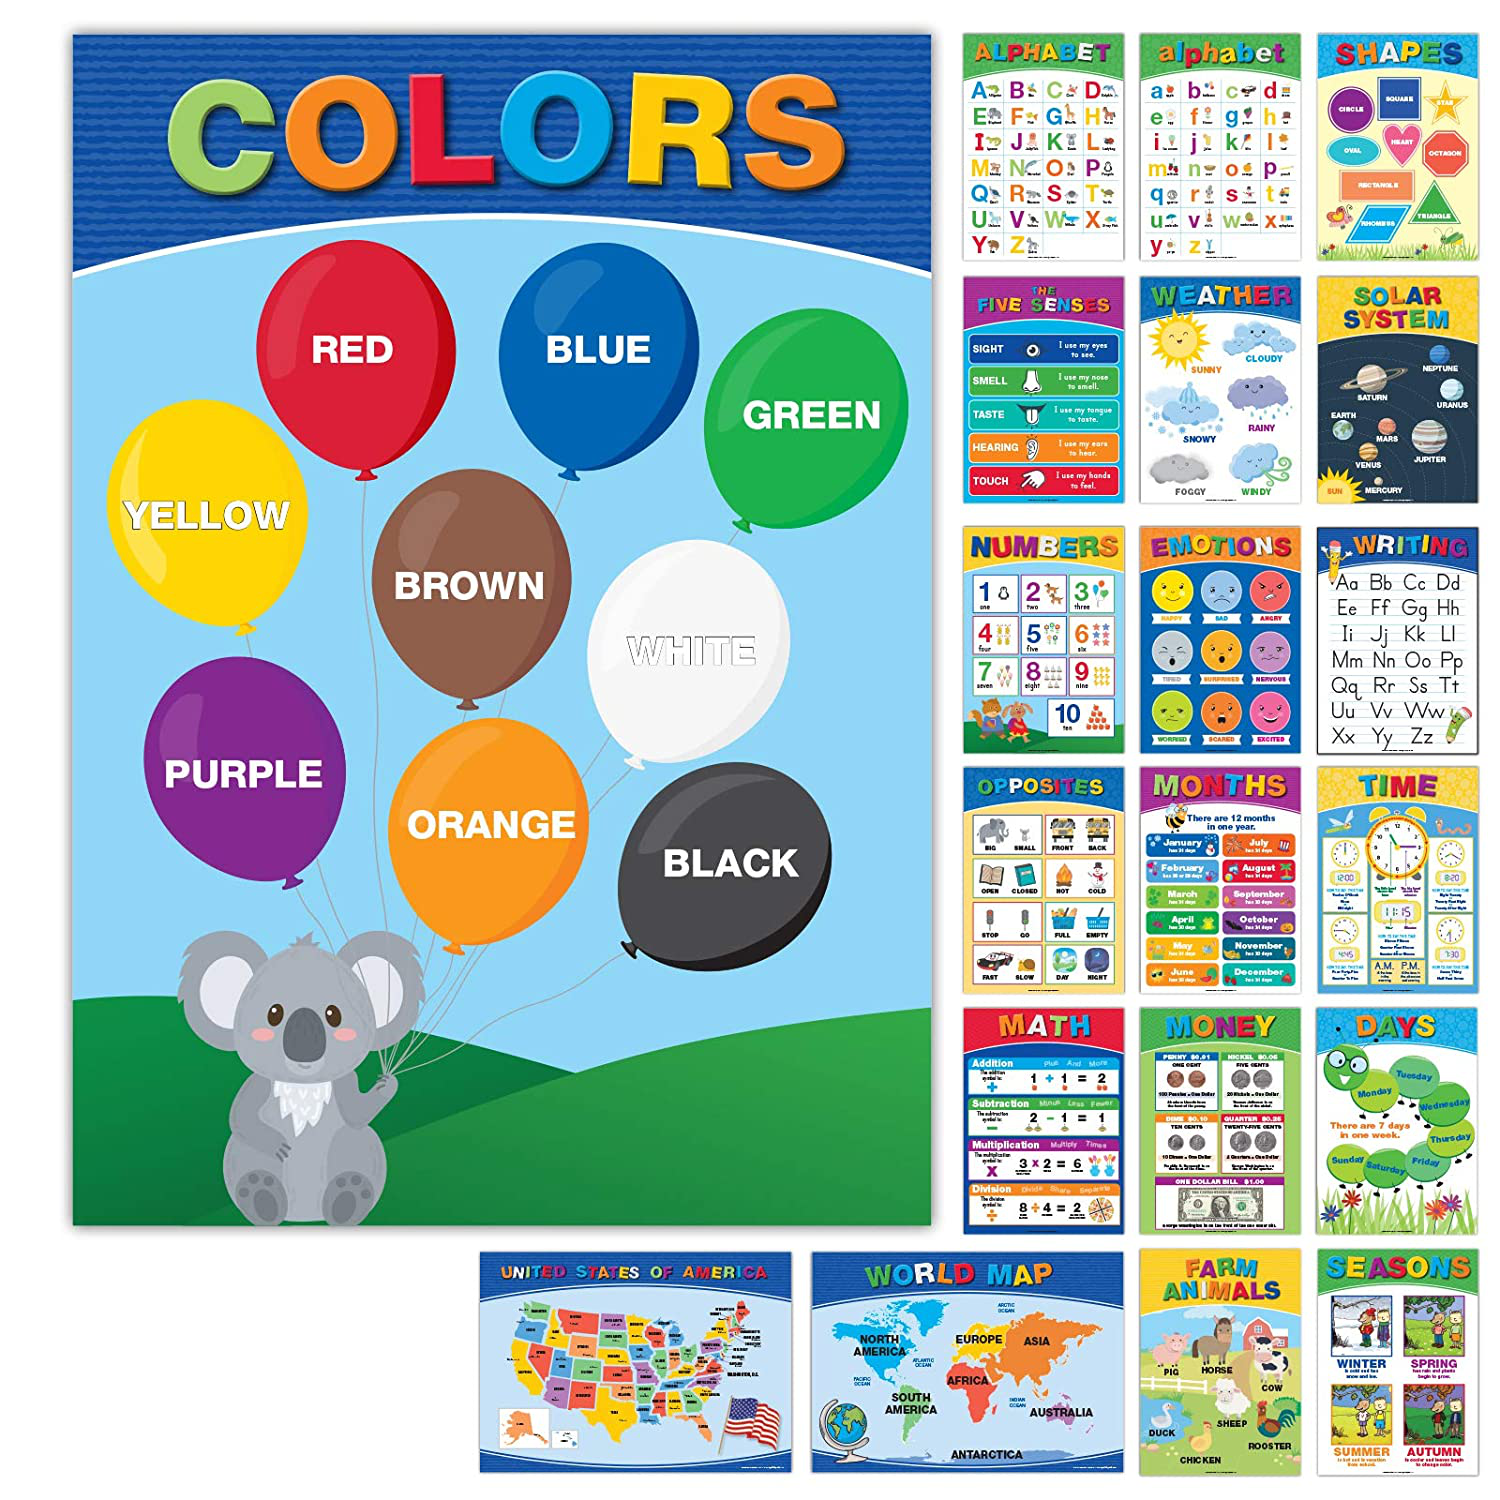 20 Large Educational Posters For Kids Toddlers (16.5x12 Double Sided English and Spanish) Includes: Alphabet Colors Letters Numbers Shapes Months Days Weather Time Animals Solar System Seasons Map